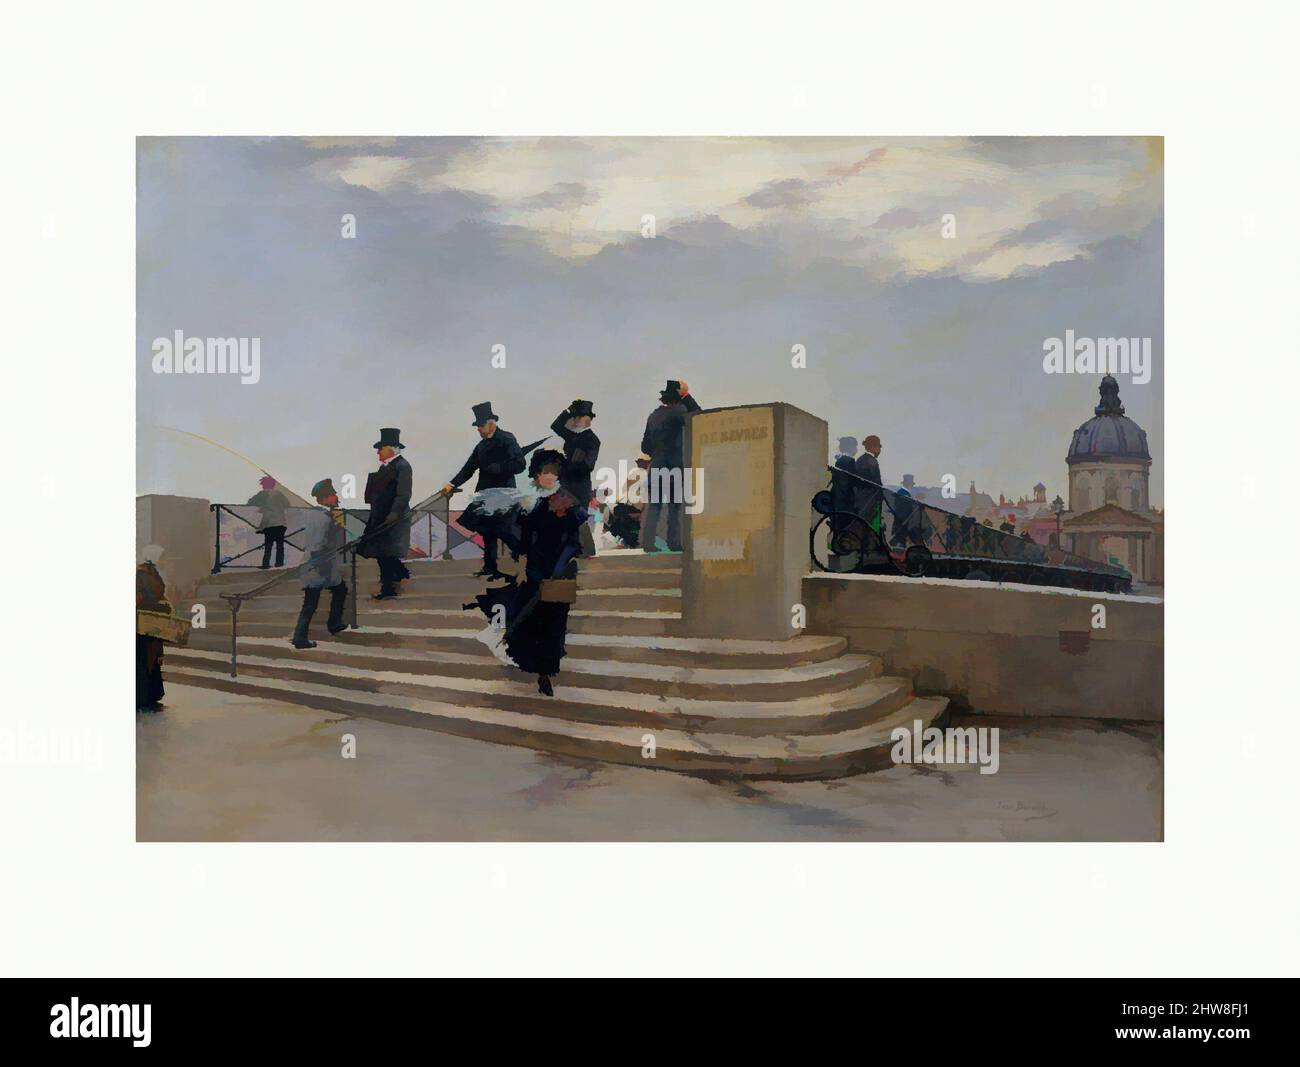 Art inspired by A Windy Day on the Pont des Arts, ca. 1880–81, Oil on canvas, 15 5/8 x 22 1/4 in. (39.7 x 56.5 cm), Paintings, Jean Béraud (French, St. Petersburg 1849–1936 Paris), This painting of about 1880–81 depicts the Pont des Arts, a footbridge spanning the Seine between the, Classic works modernized by Artotop with a splash of modernity. Shapes, color and value, eye-catching visual impact on art. Emotions through freedom of artworks in a contemporary way. A timeless message pursuing a wildly creative new direction. Artists turning to the digital medium and creating the Artotop NFT Stock Photo